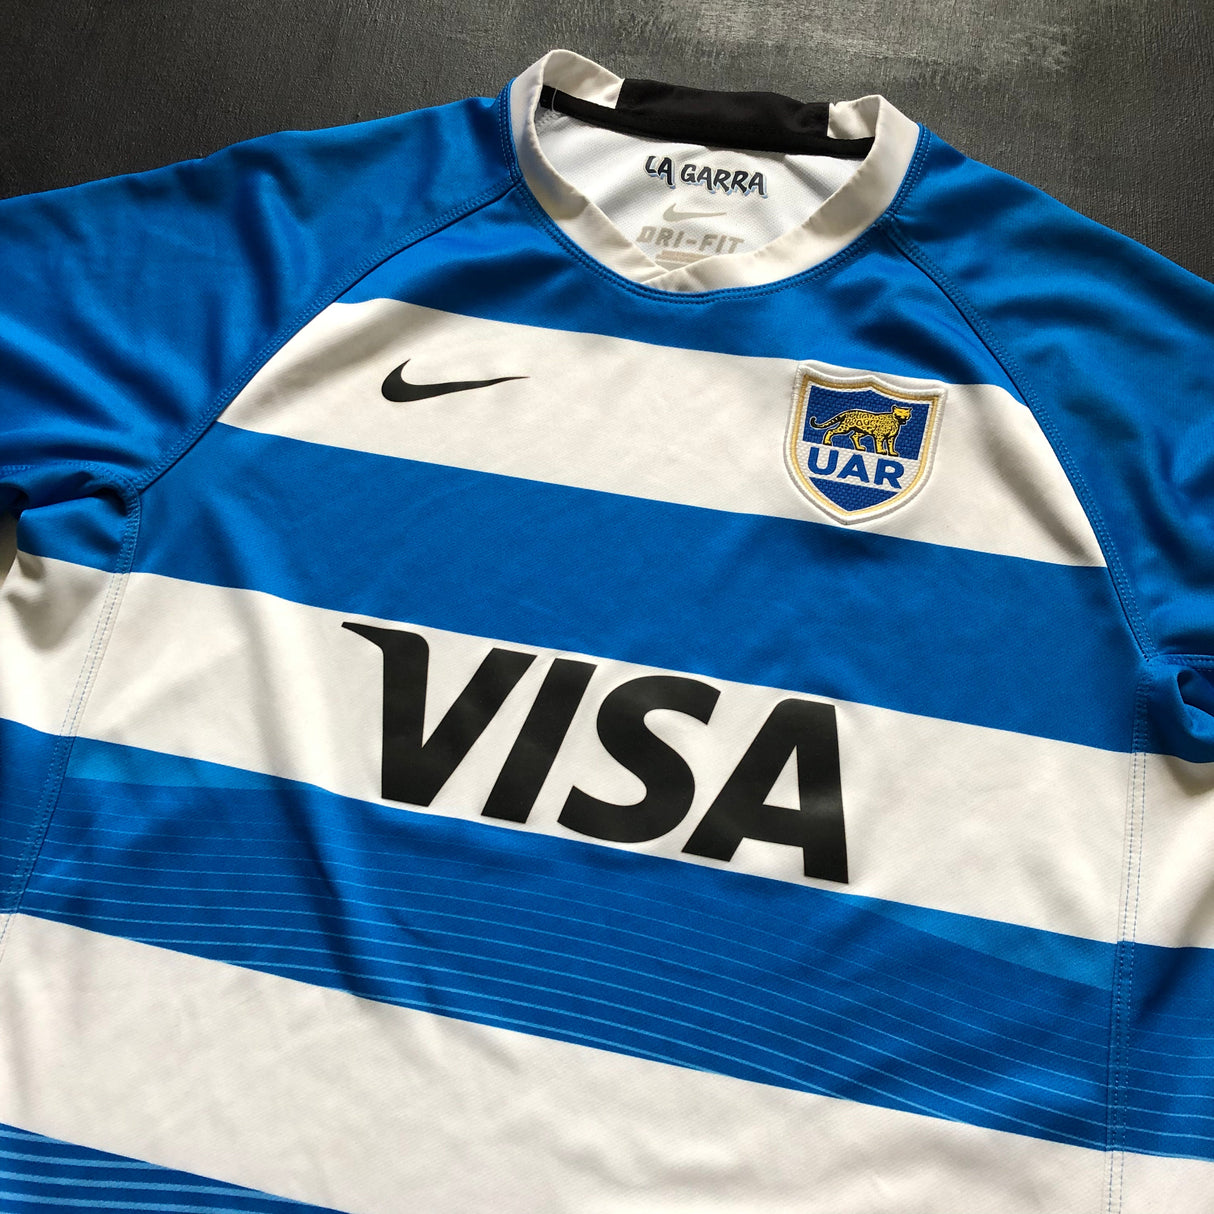 Argentina National Rugby Team Jersey 2016 Medium Underdog Rugby - The Tier 2 Rugby Shop 